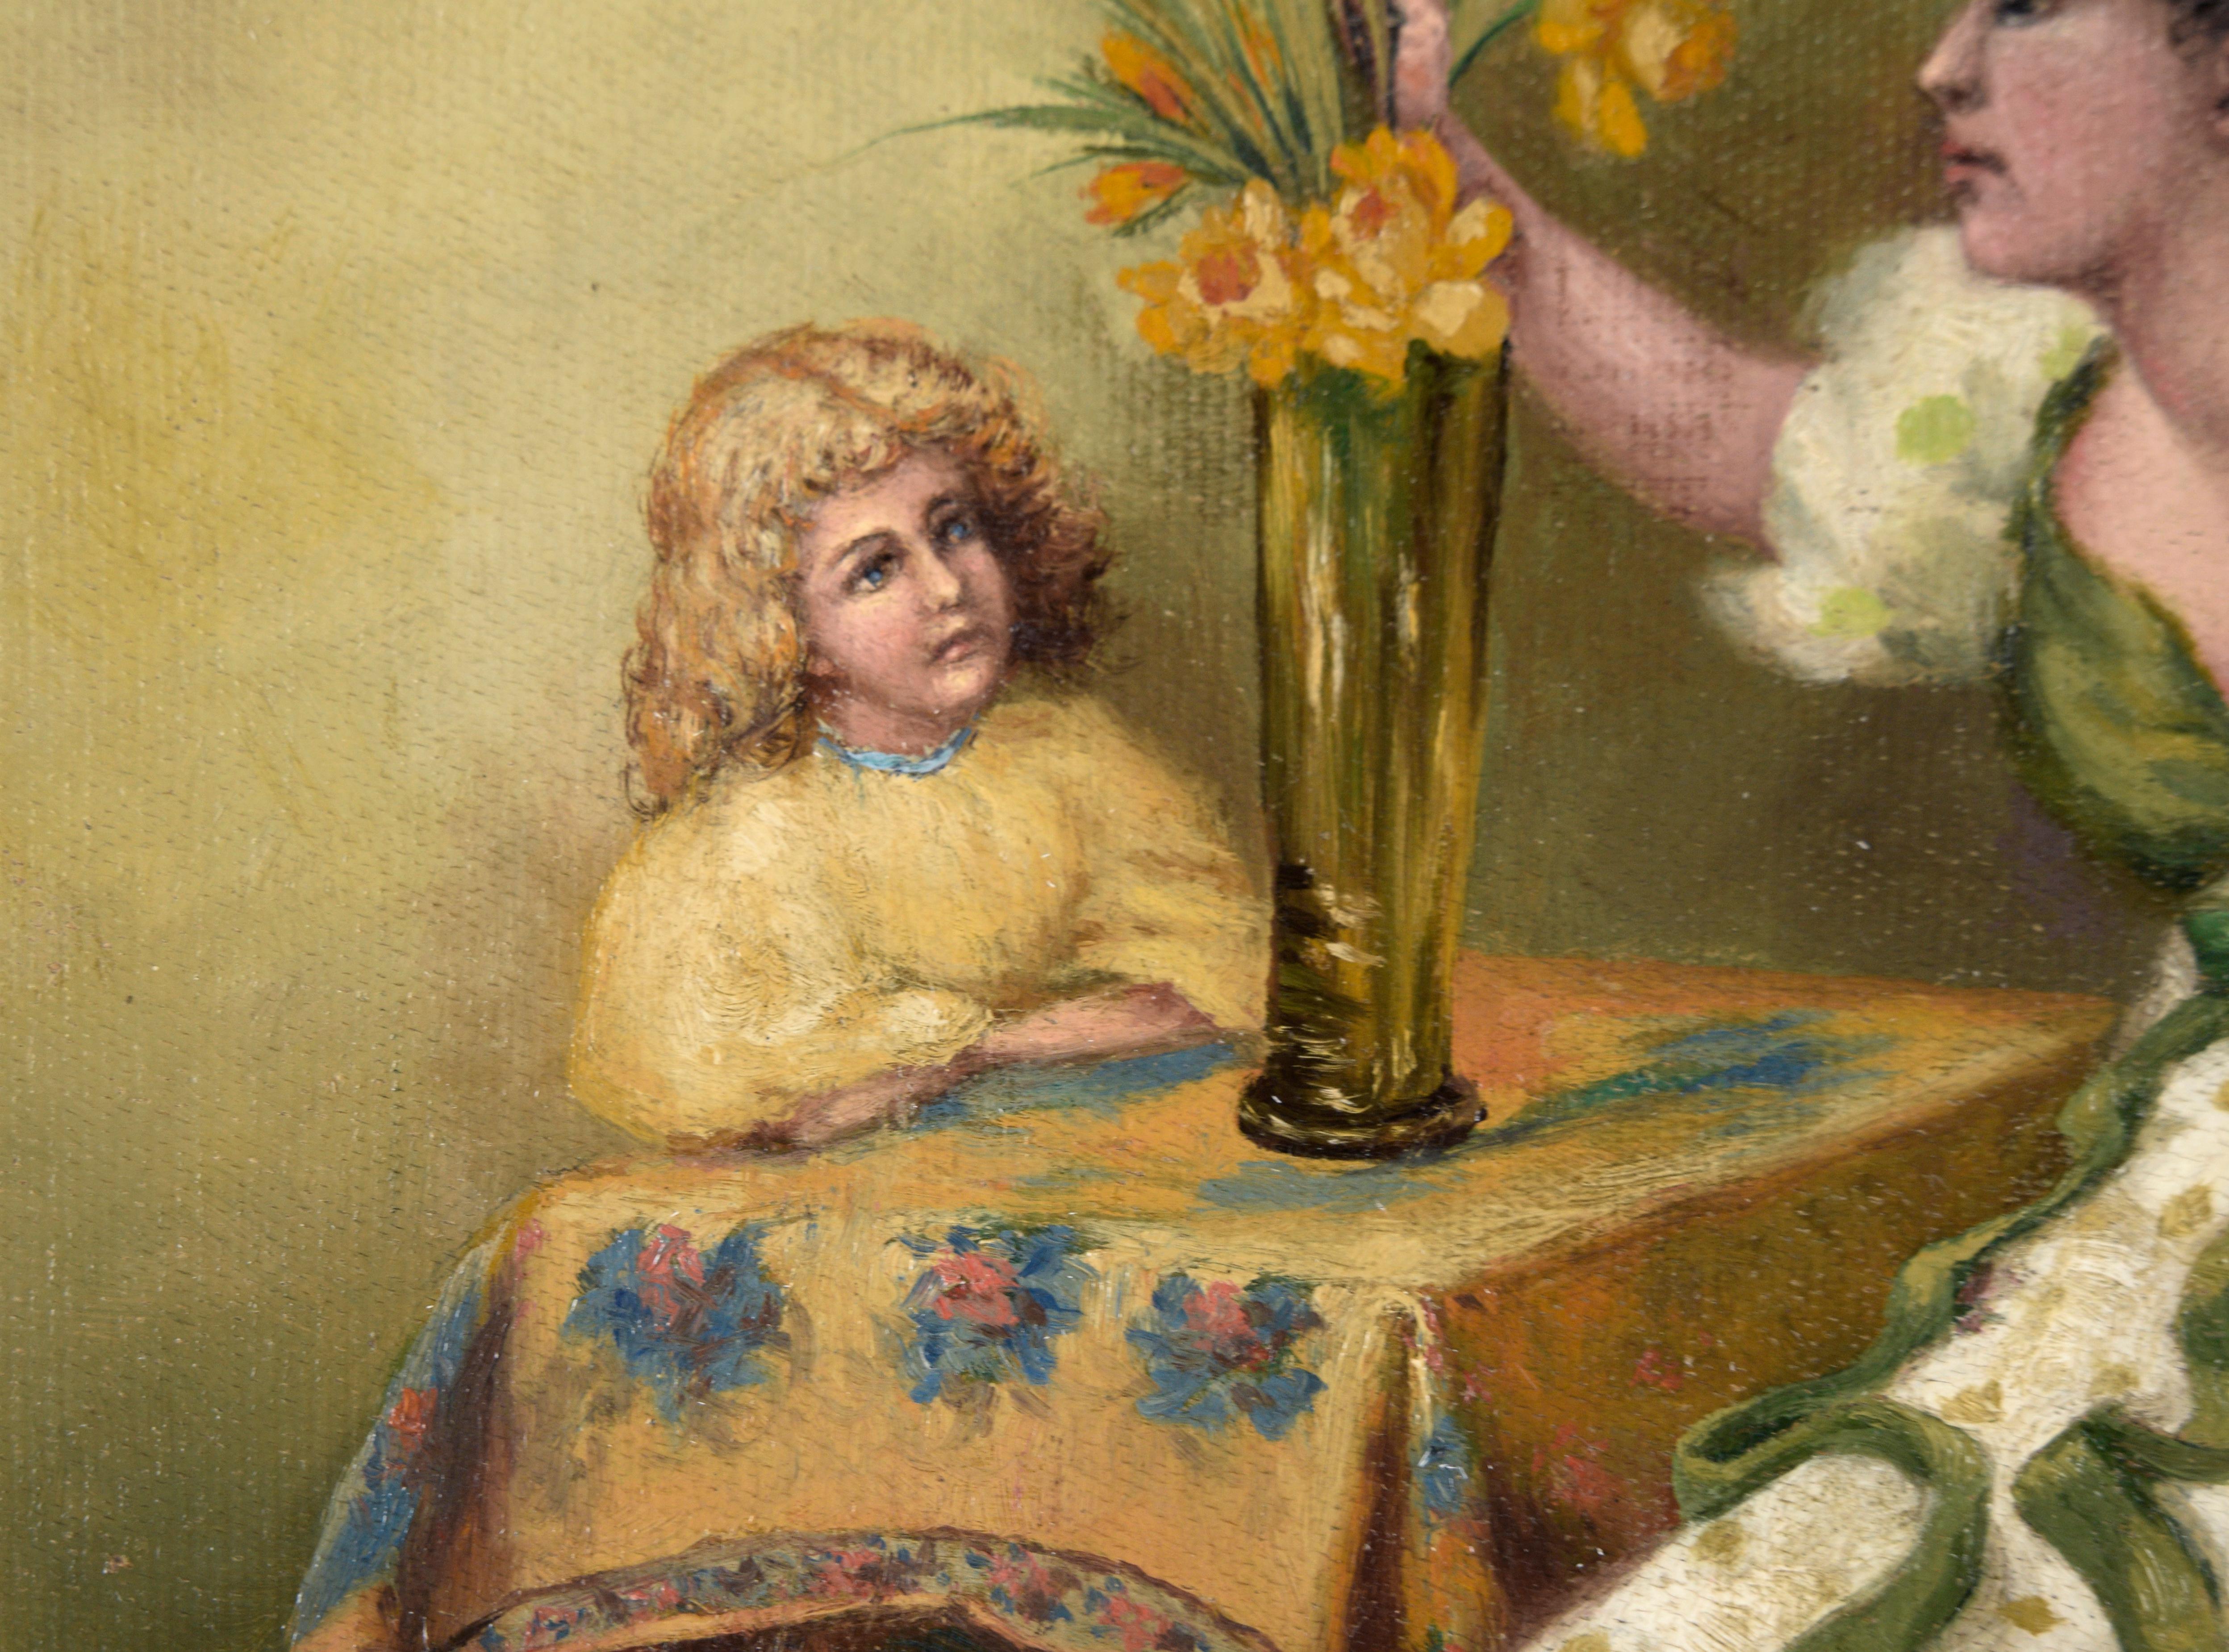 Mother and Daughter Arranging Daffodils in a Vase - Oil on Canvas For Sale 1